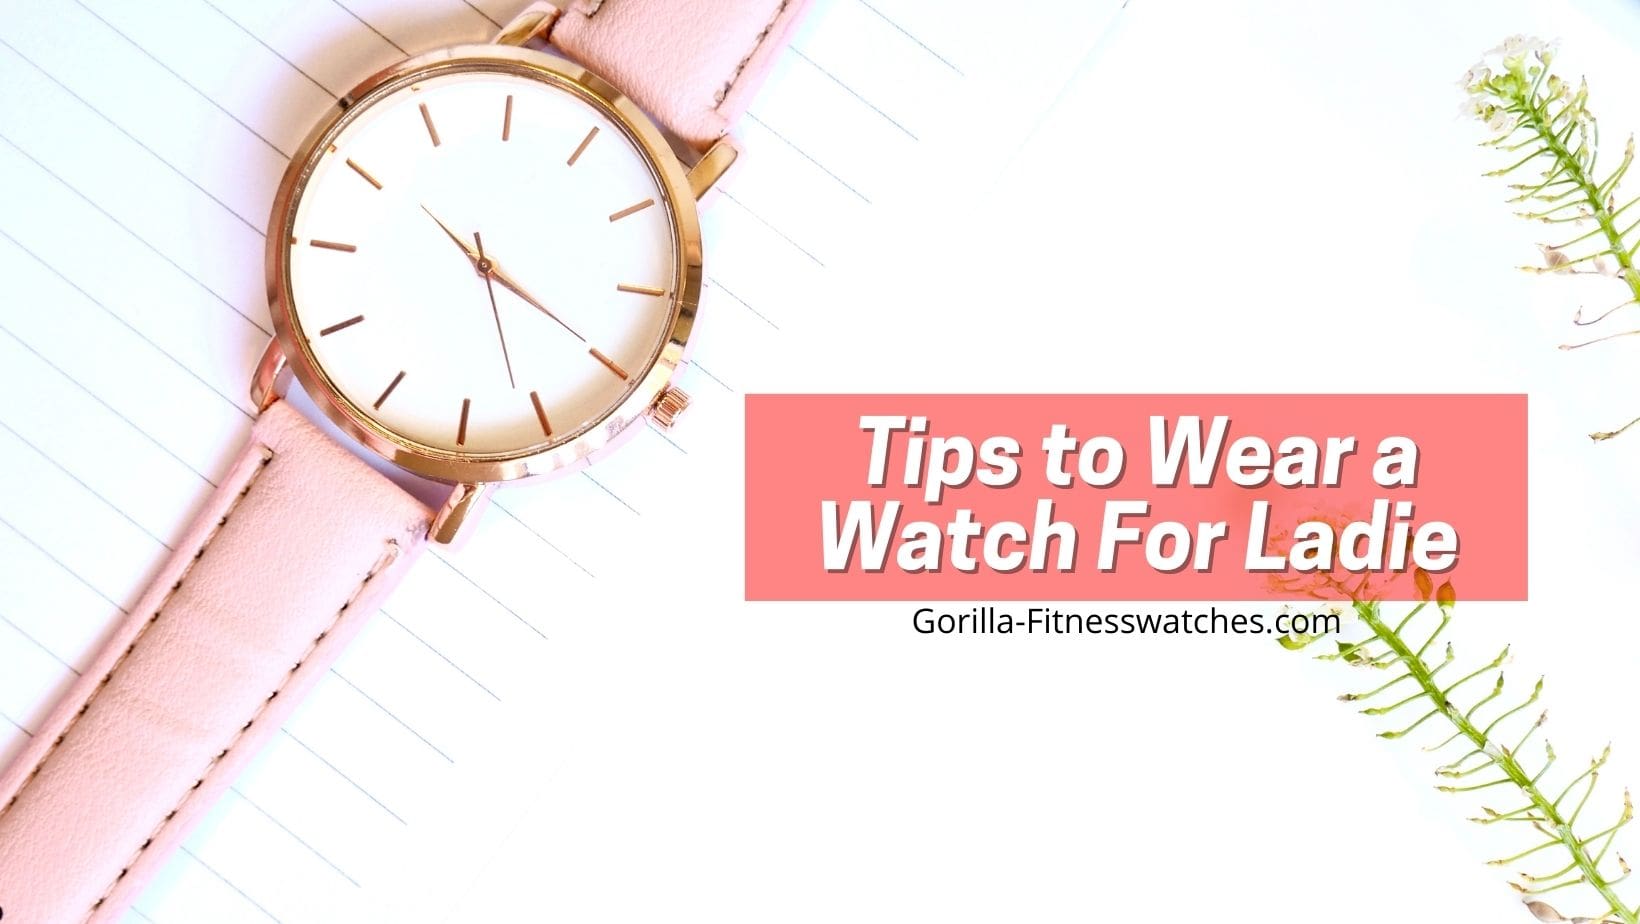 How To Wear a Watch for Women